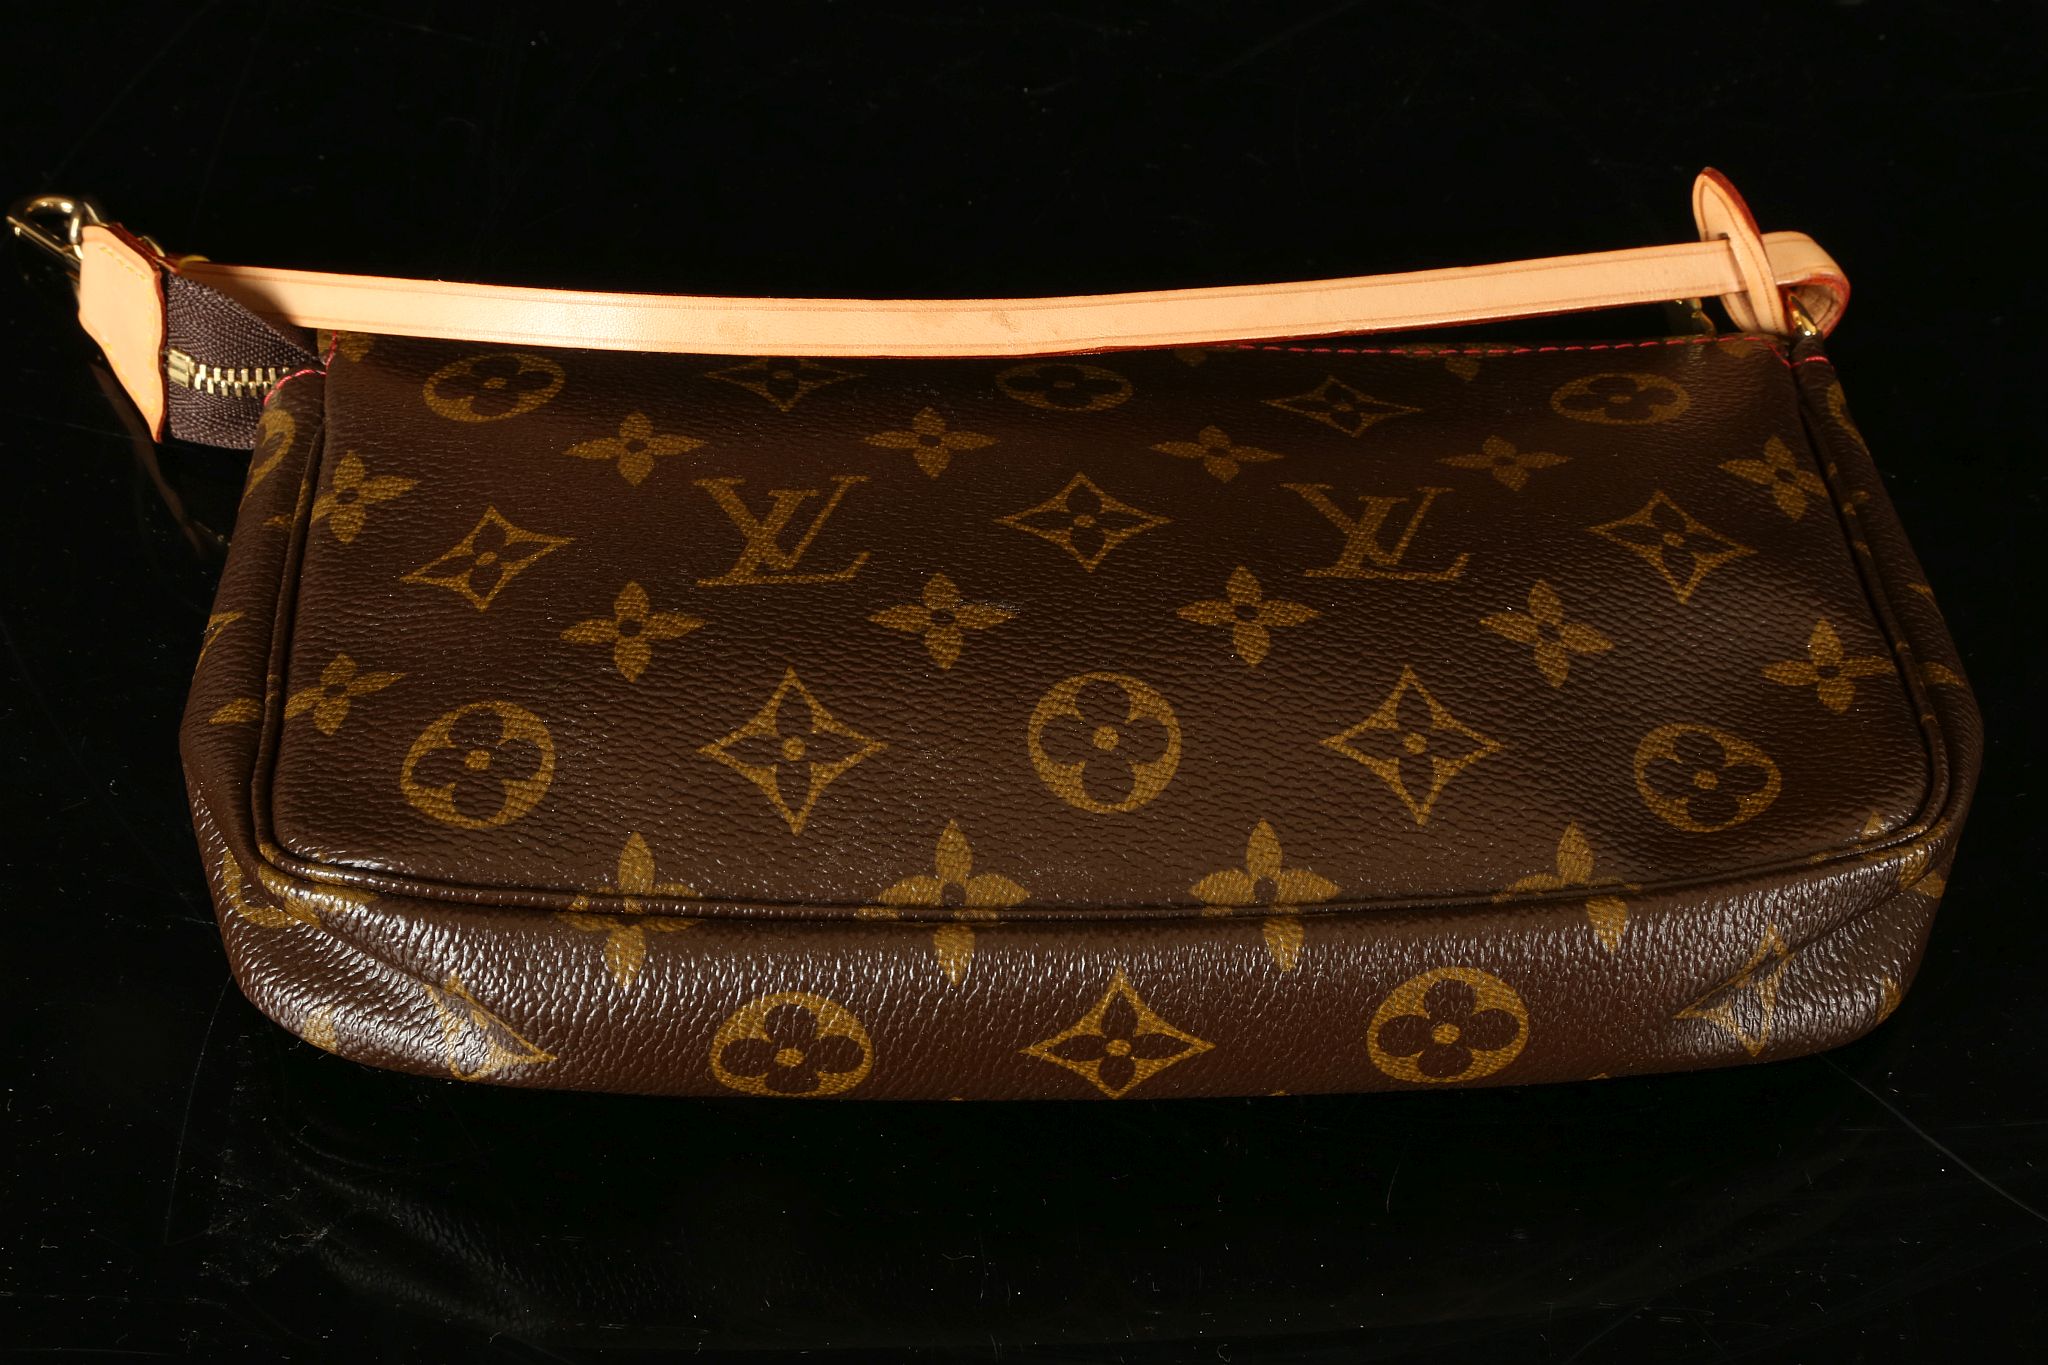 LOUIS VUITTON CERISES POCHETTE, date code for 2005, monogram canvas with leather trim and printed - Image 7 of 10